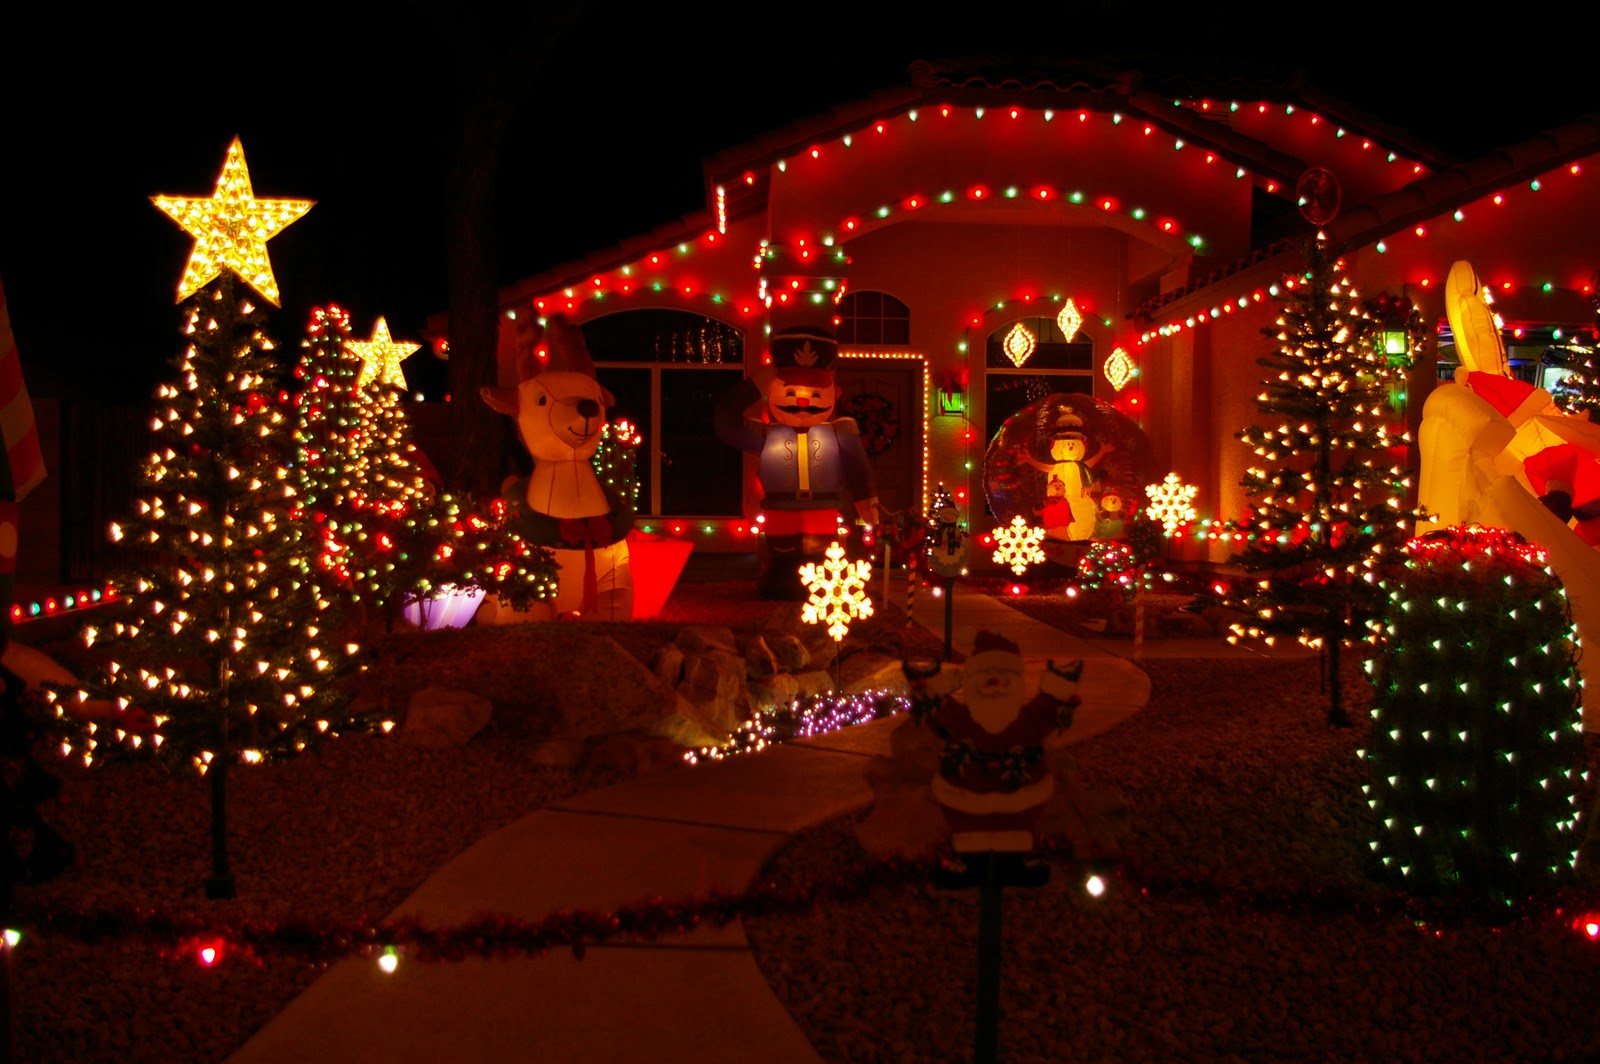 Christmas Lights Wallpaper Pictures Pics Photos Image